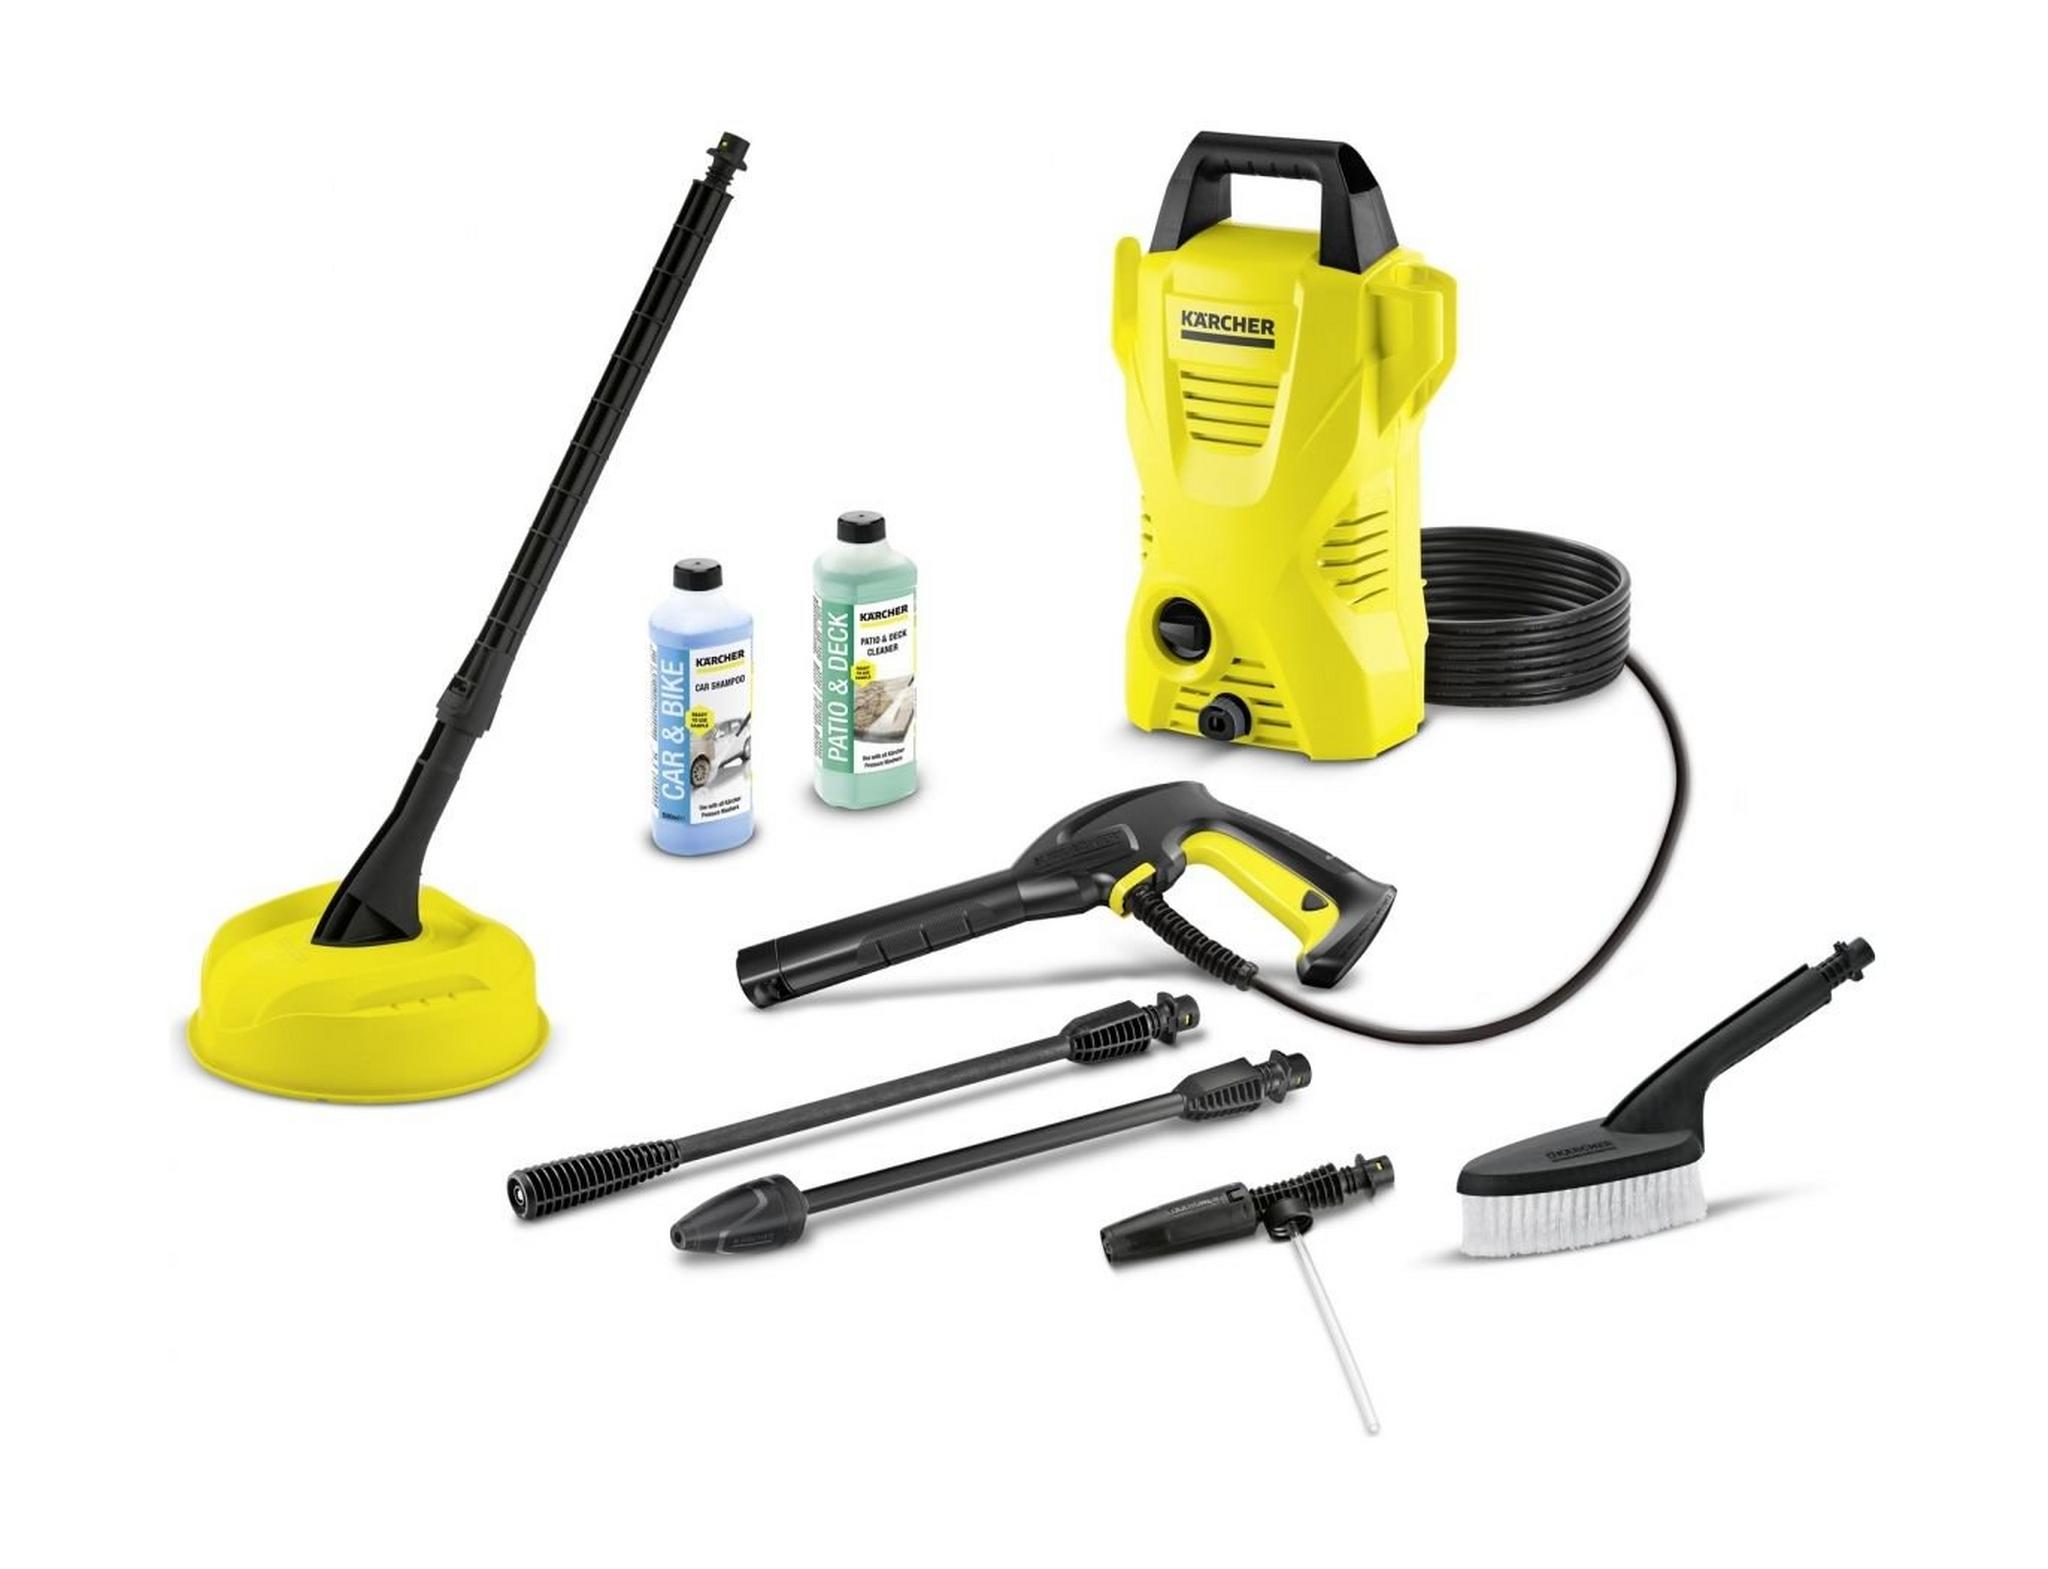 Karcher High Compact Pressure Washer K2 For Car & Home – Yellow / Black